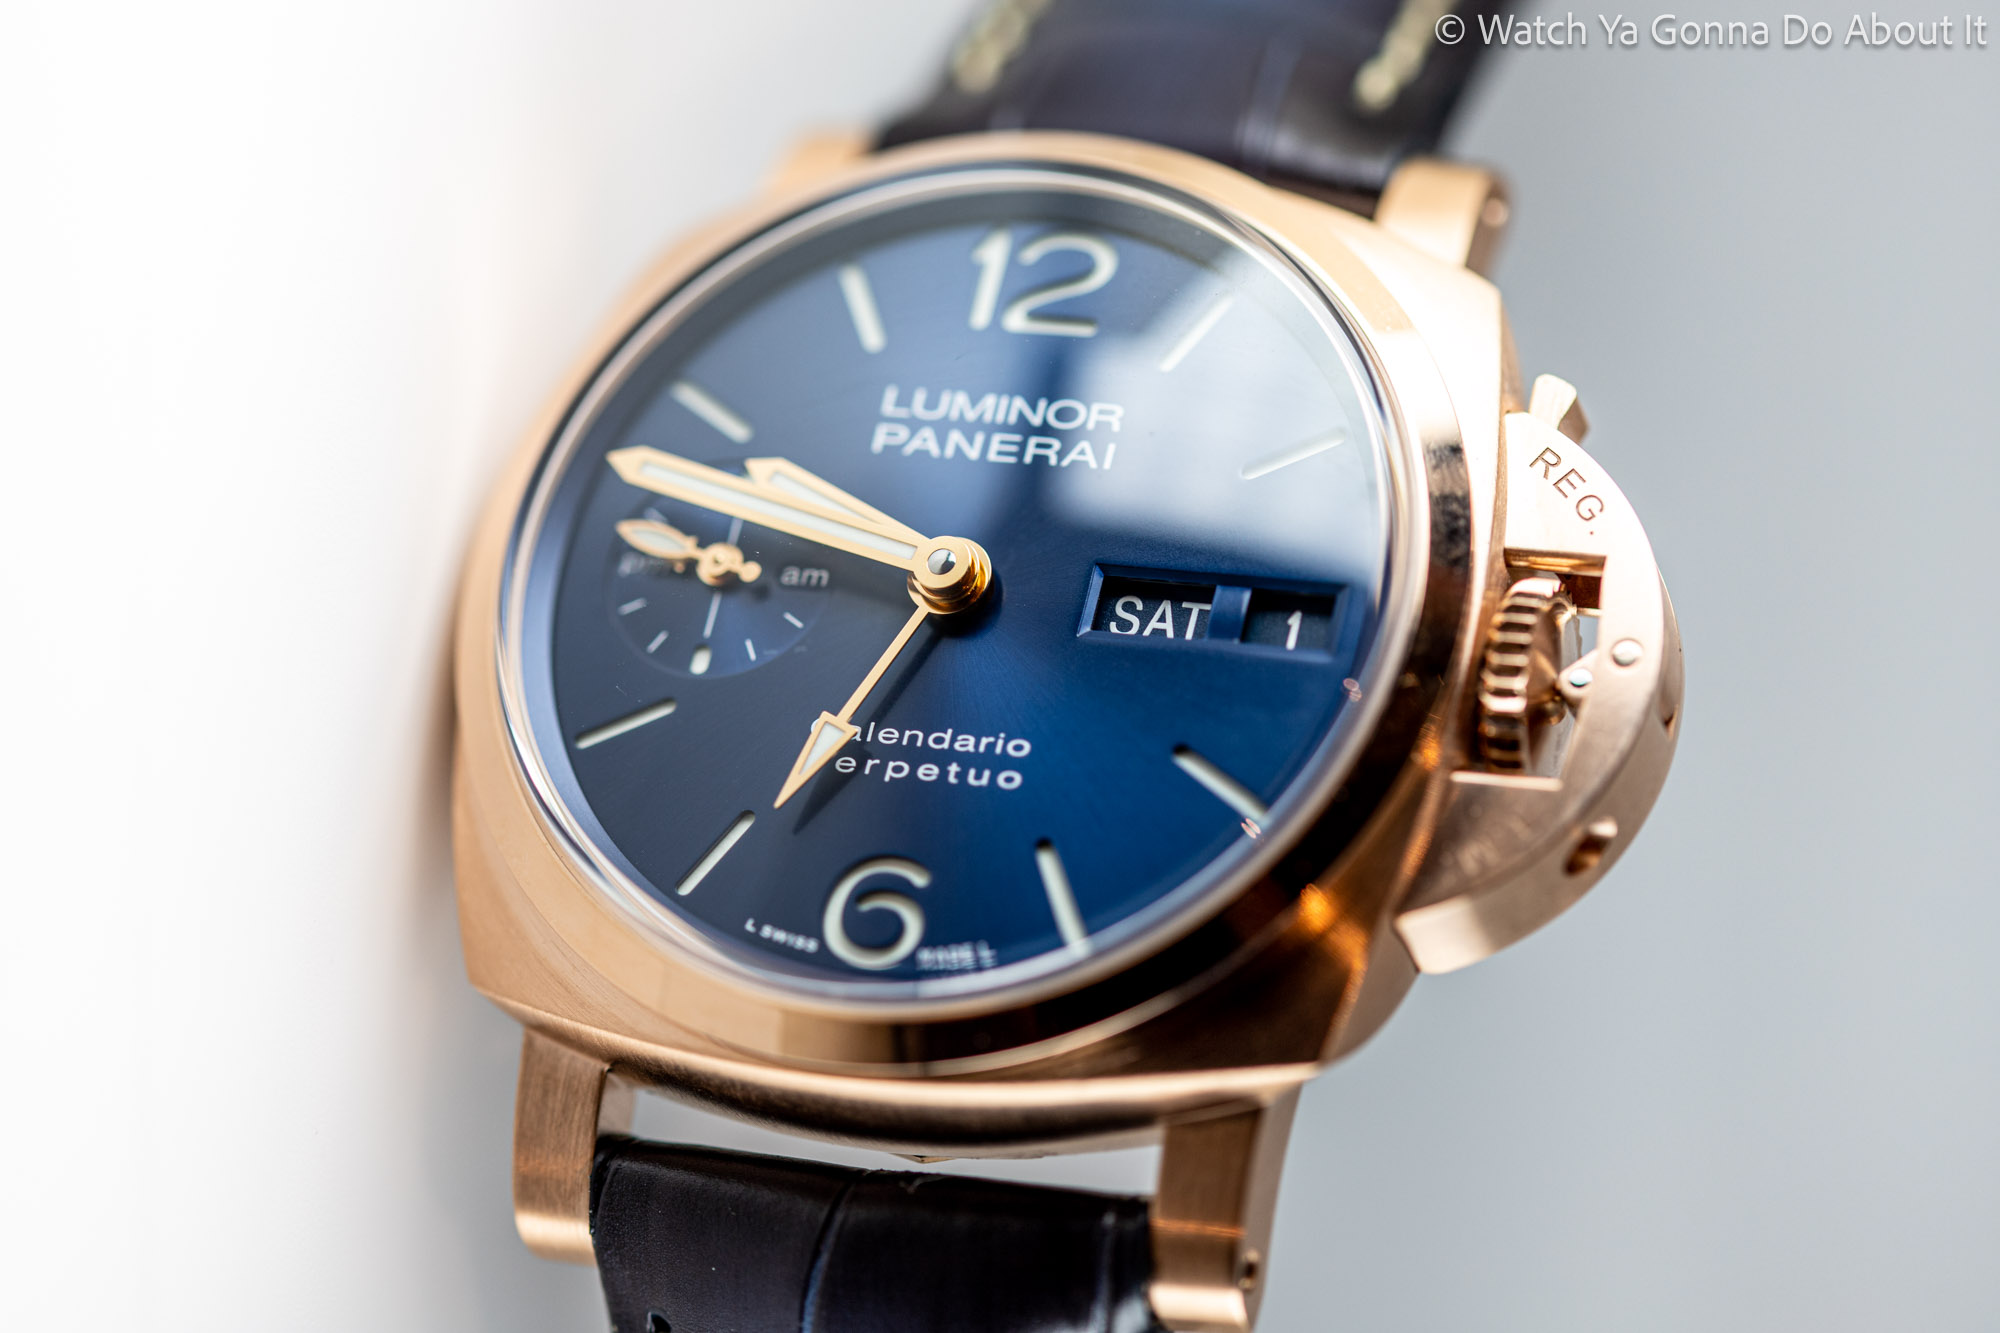 Quick Hands On Review Of The New Panerai Luminor Perpetual Calendar